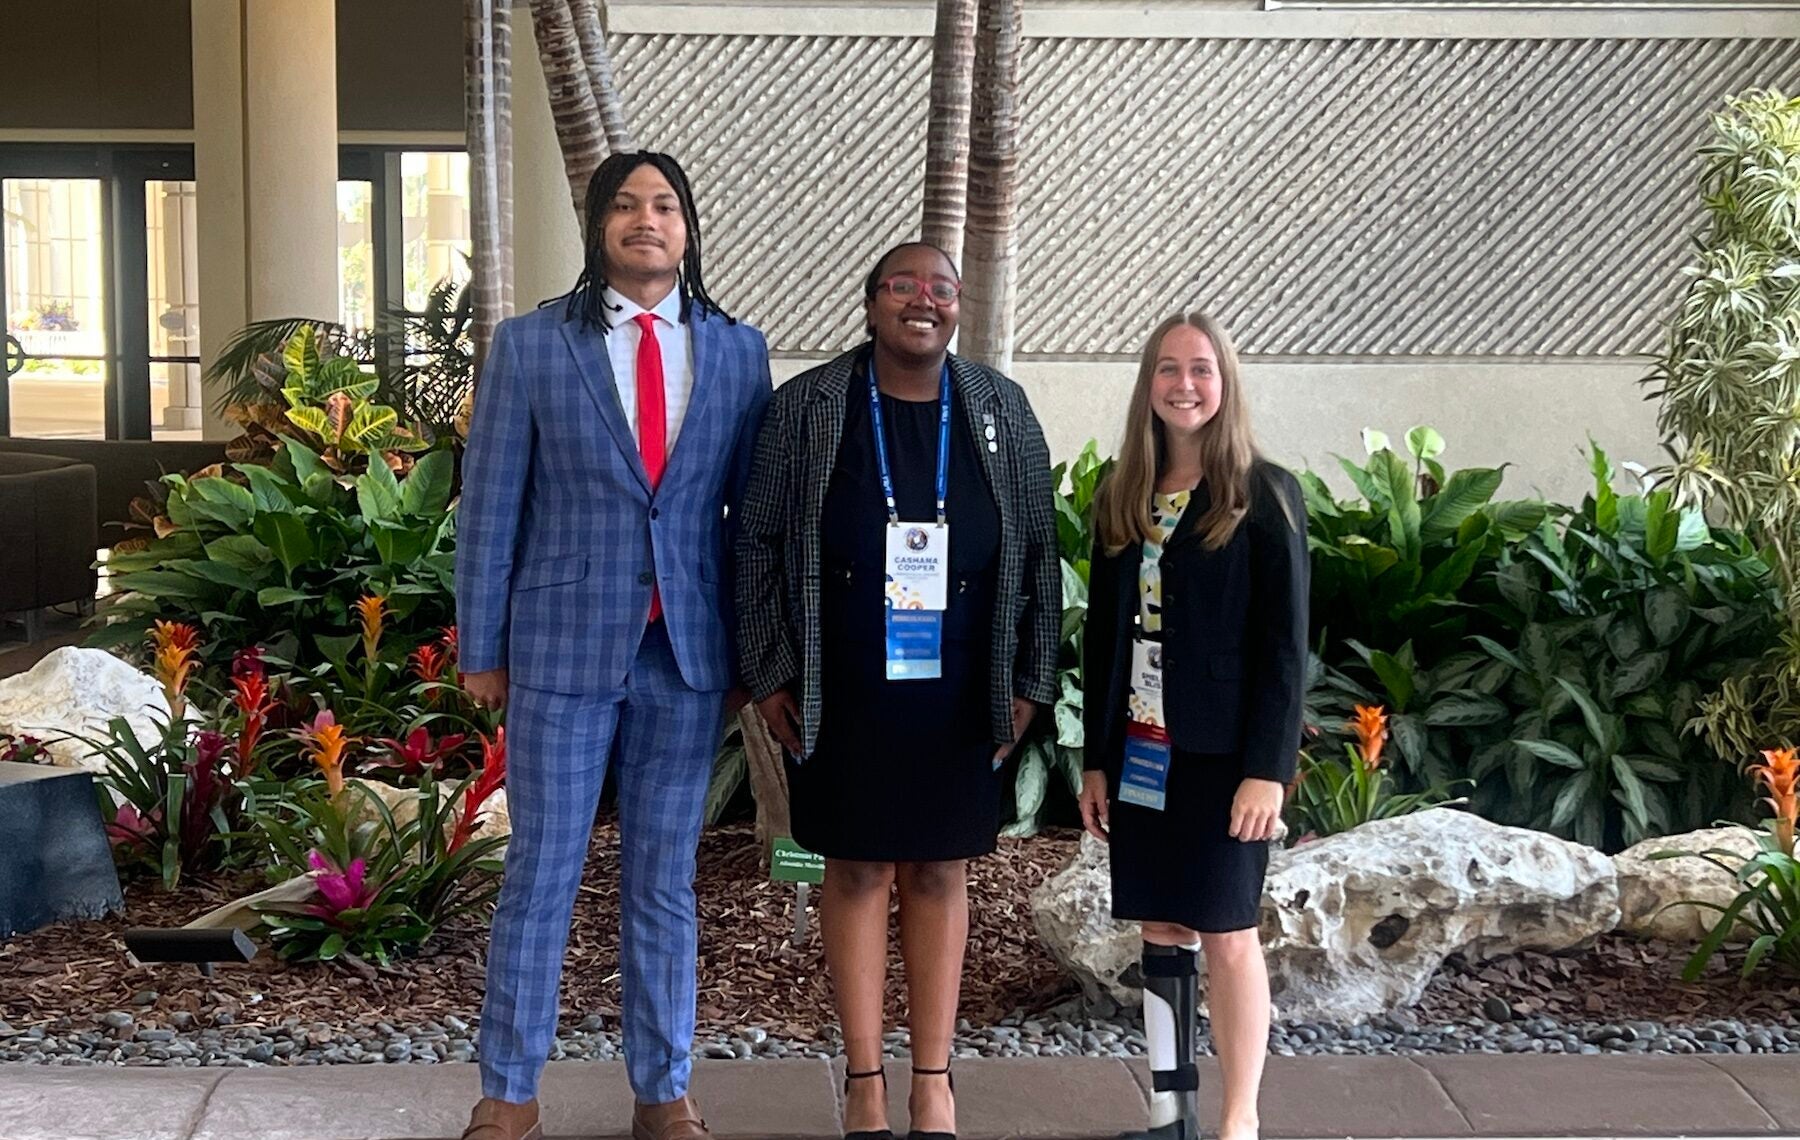 Tyler Hartl, Cashana Cooper, and Shelly Bliss compete at Future Business Leaders of America (FBLA) National Leadership Conference